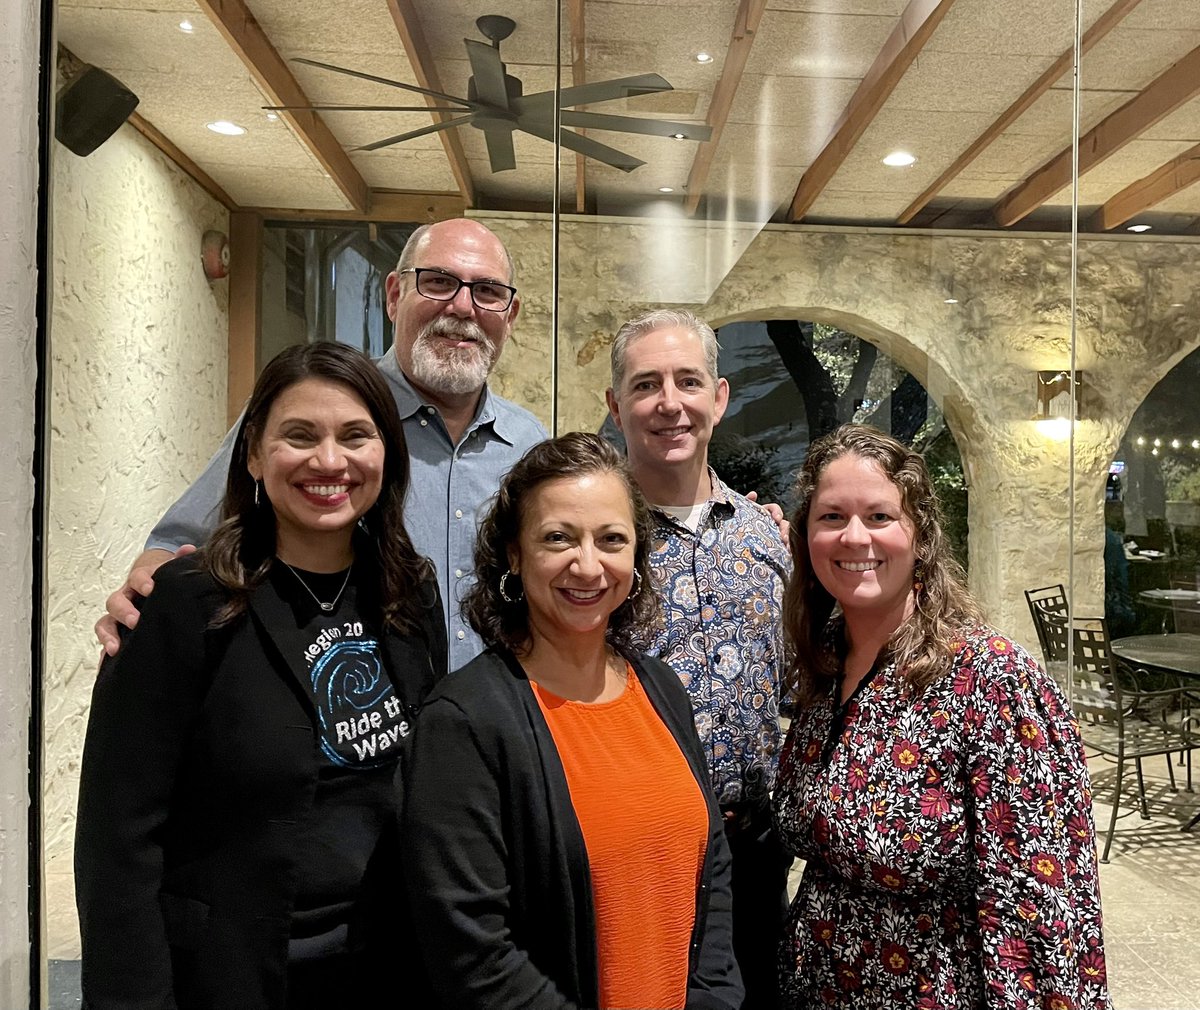 Fun to attend @TEPSA_Region20 Fall Meeting. Glad they let me go even though I’m retired. 😎 Great guest speaker @danstromain . Hung out with my Judson pals, @GarzaOlivan and Alejandra Gutierrez. Kaitlin Andersen was with them -a student when I was principal at Medina Valley!